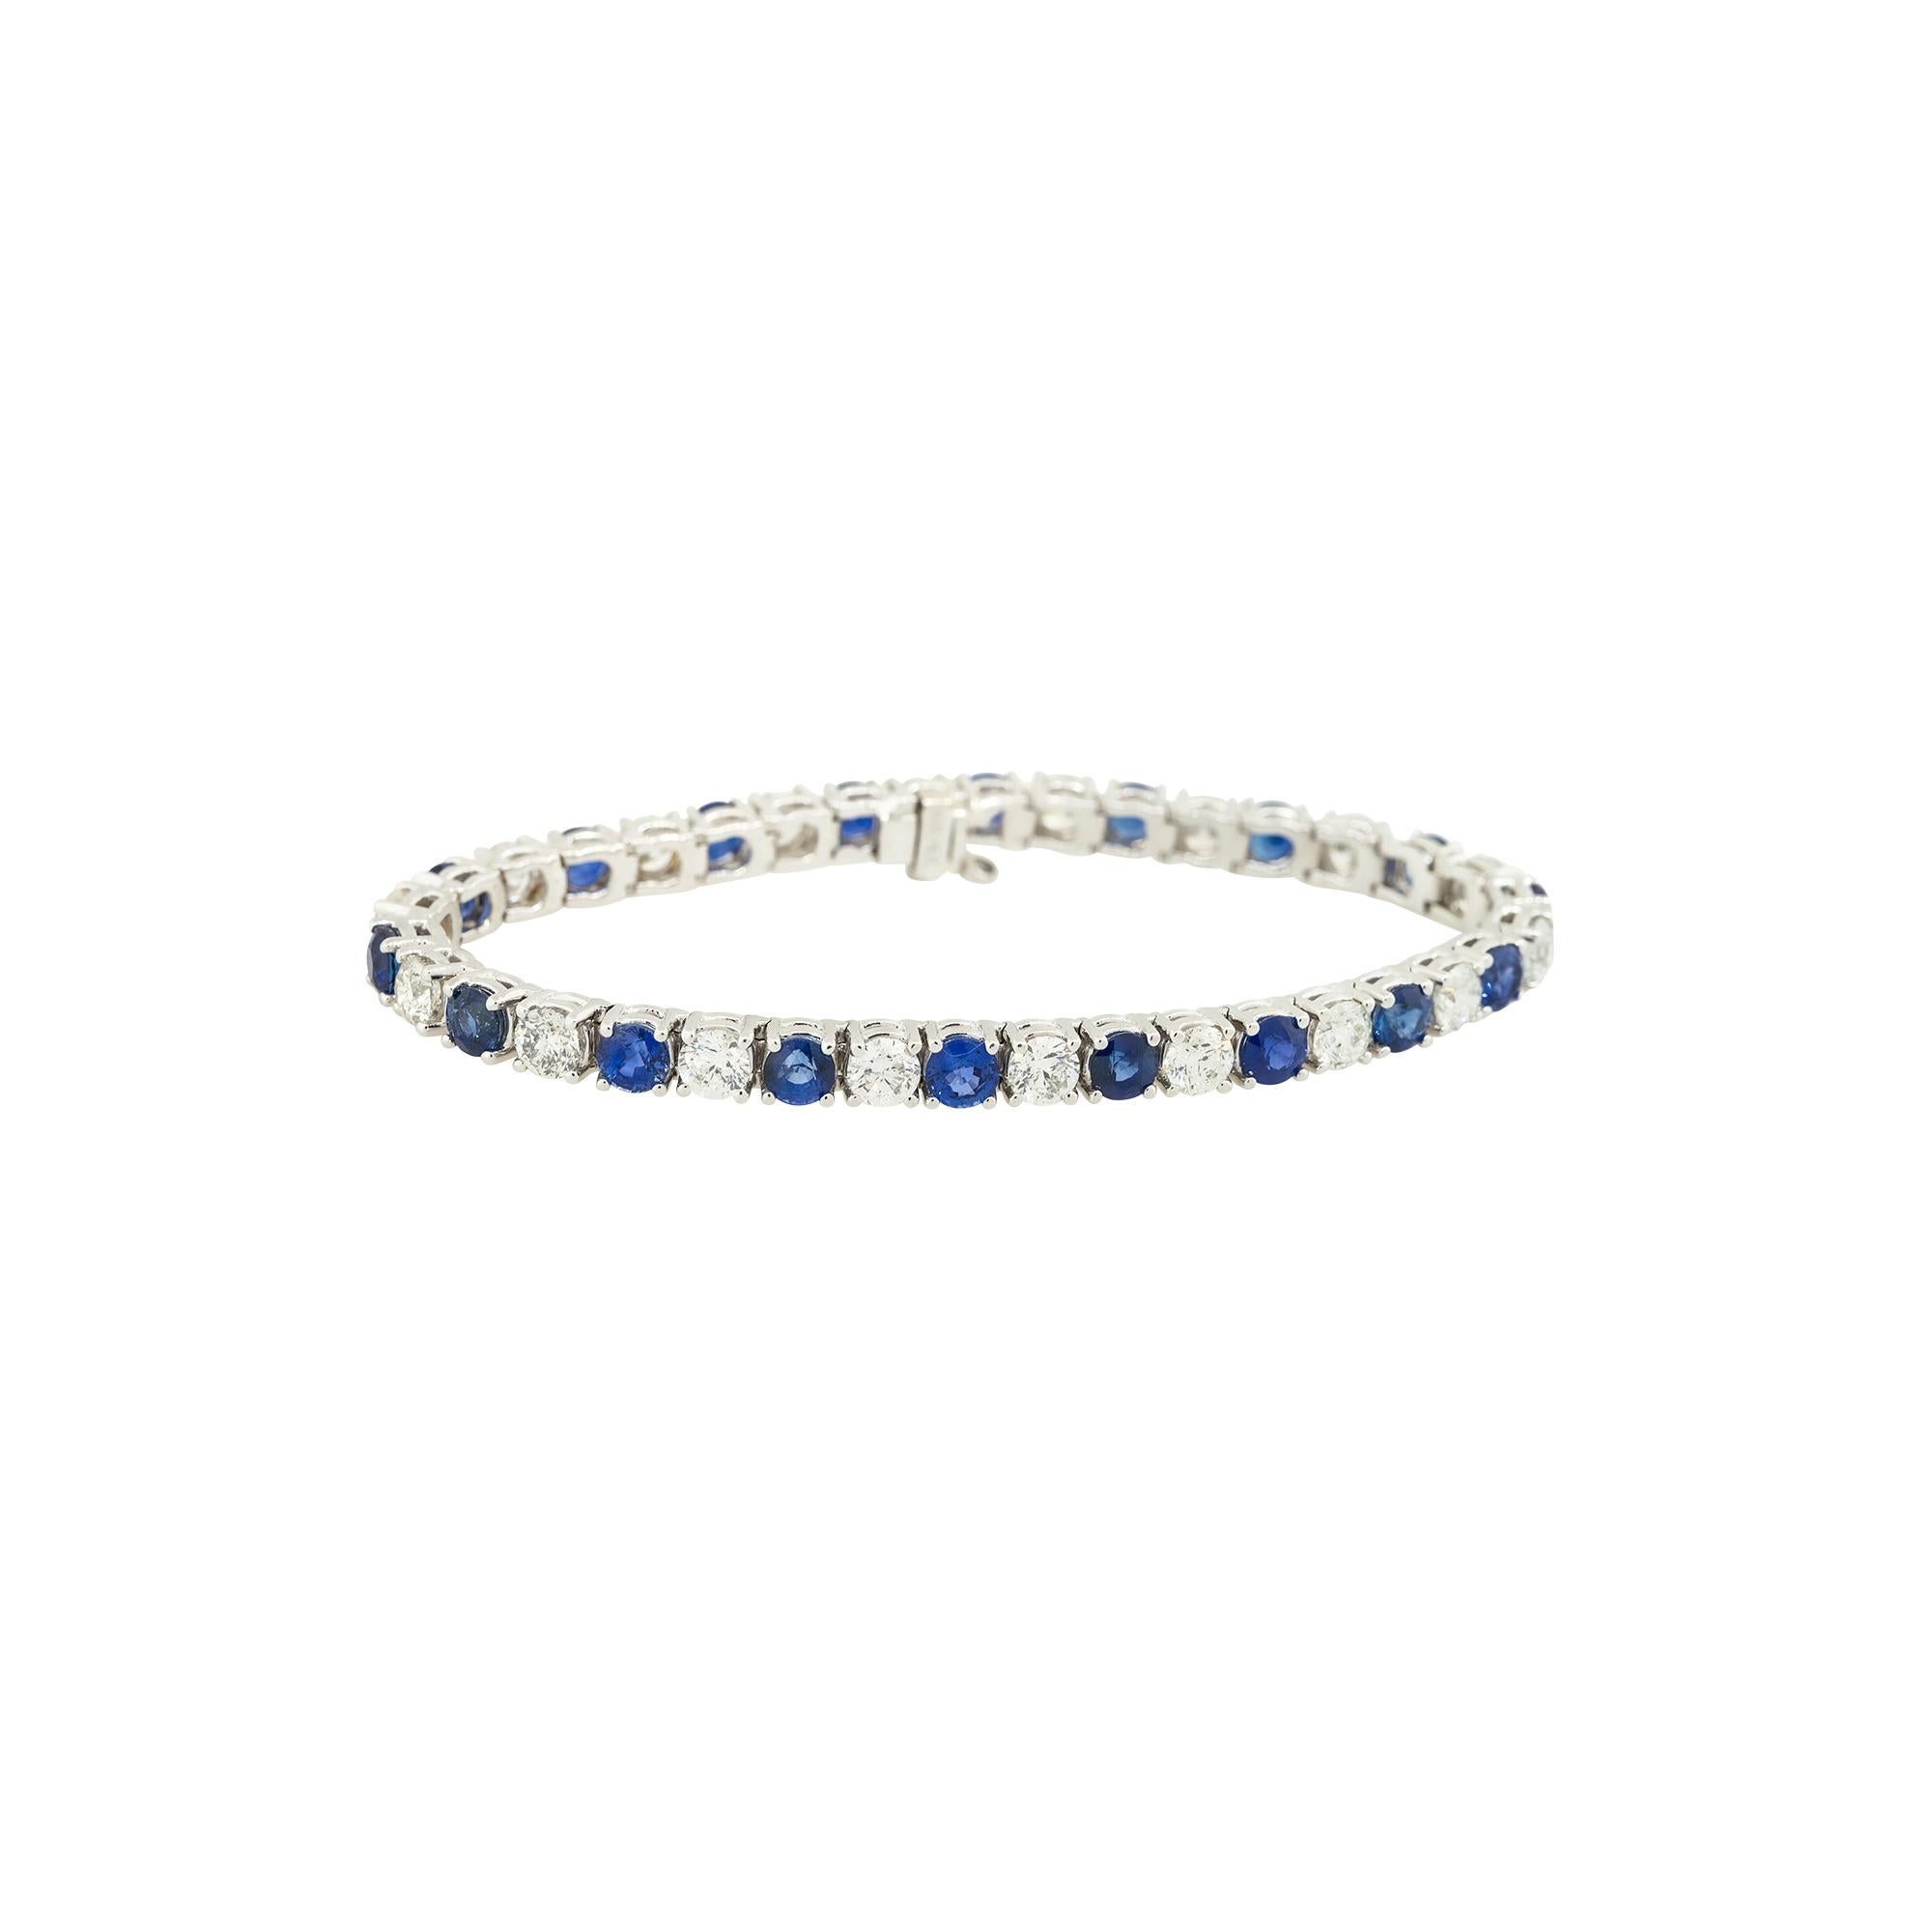 Material: 18k White Gold
Diamond Details: Approx. 7.26ctw of Round Brilliant Cut Diamonds. Diamonds are G/H in color and SI in clarity
Gemstone Details: Approx. 9.85ctw of Sapphires
Clasps: Tongue in Box Clasp
Total Weight: 15.3dwt
Length: